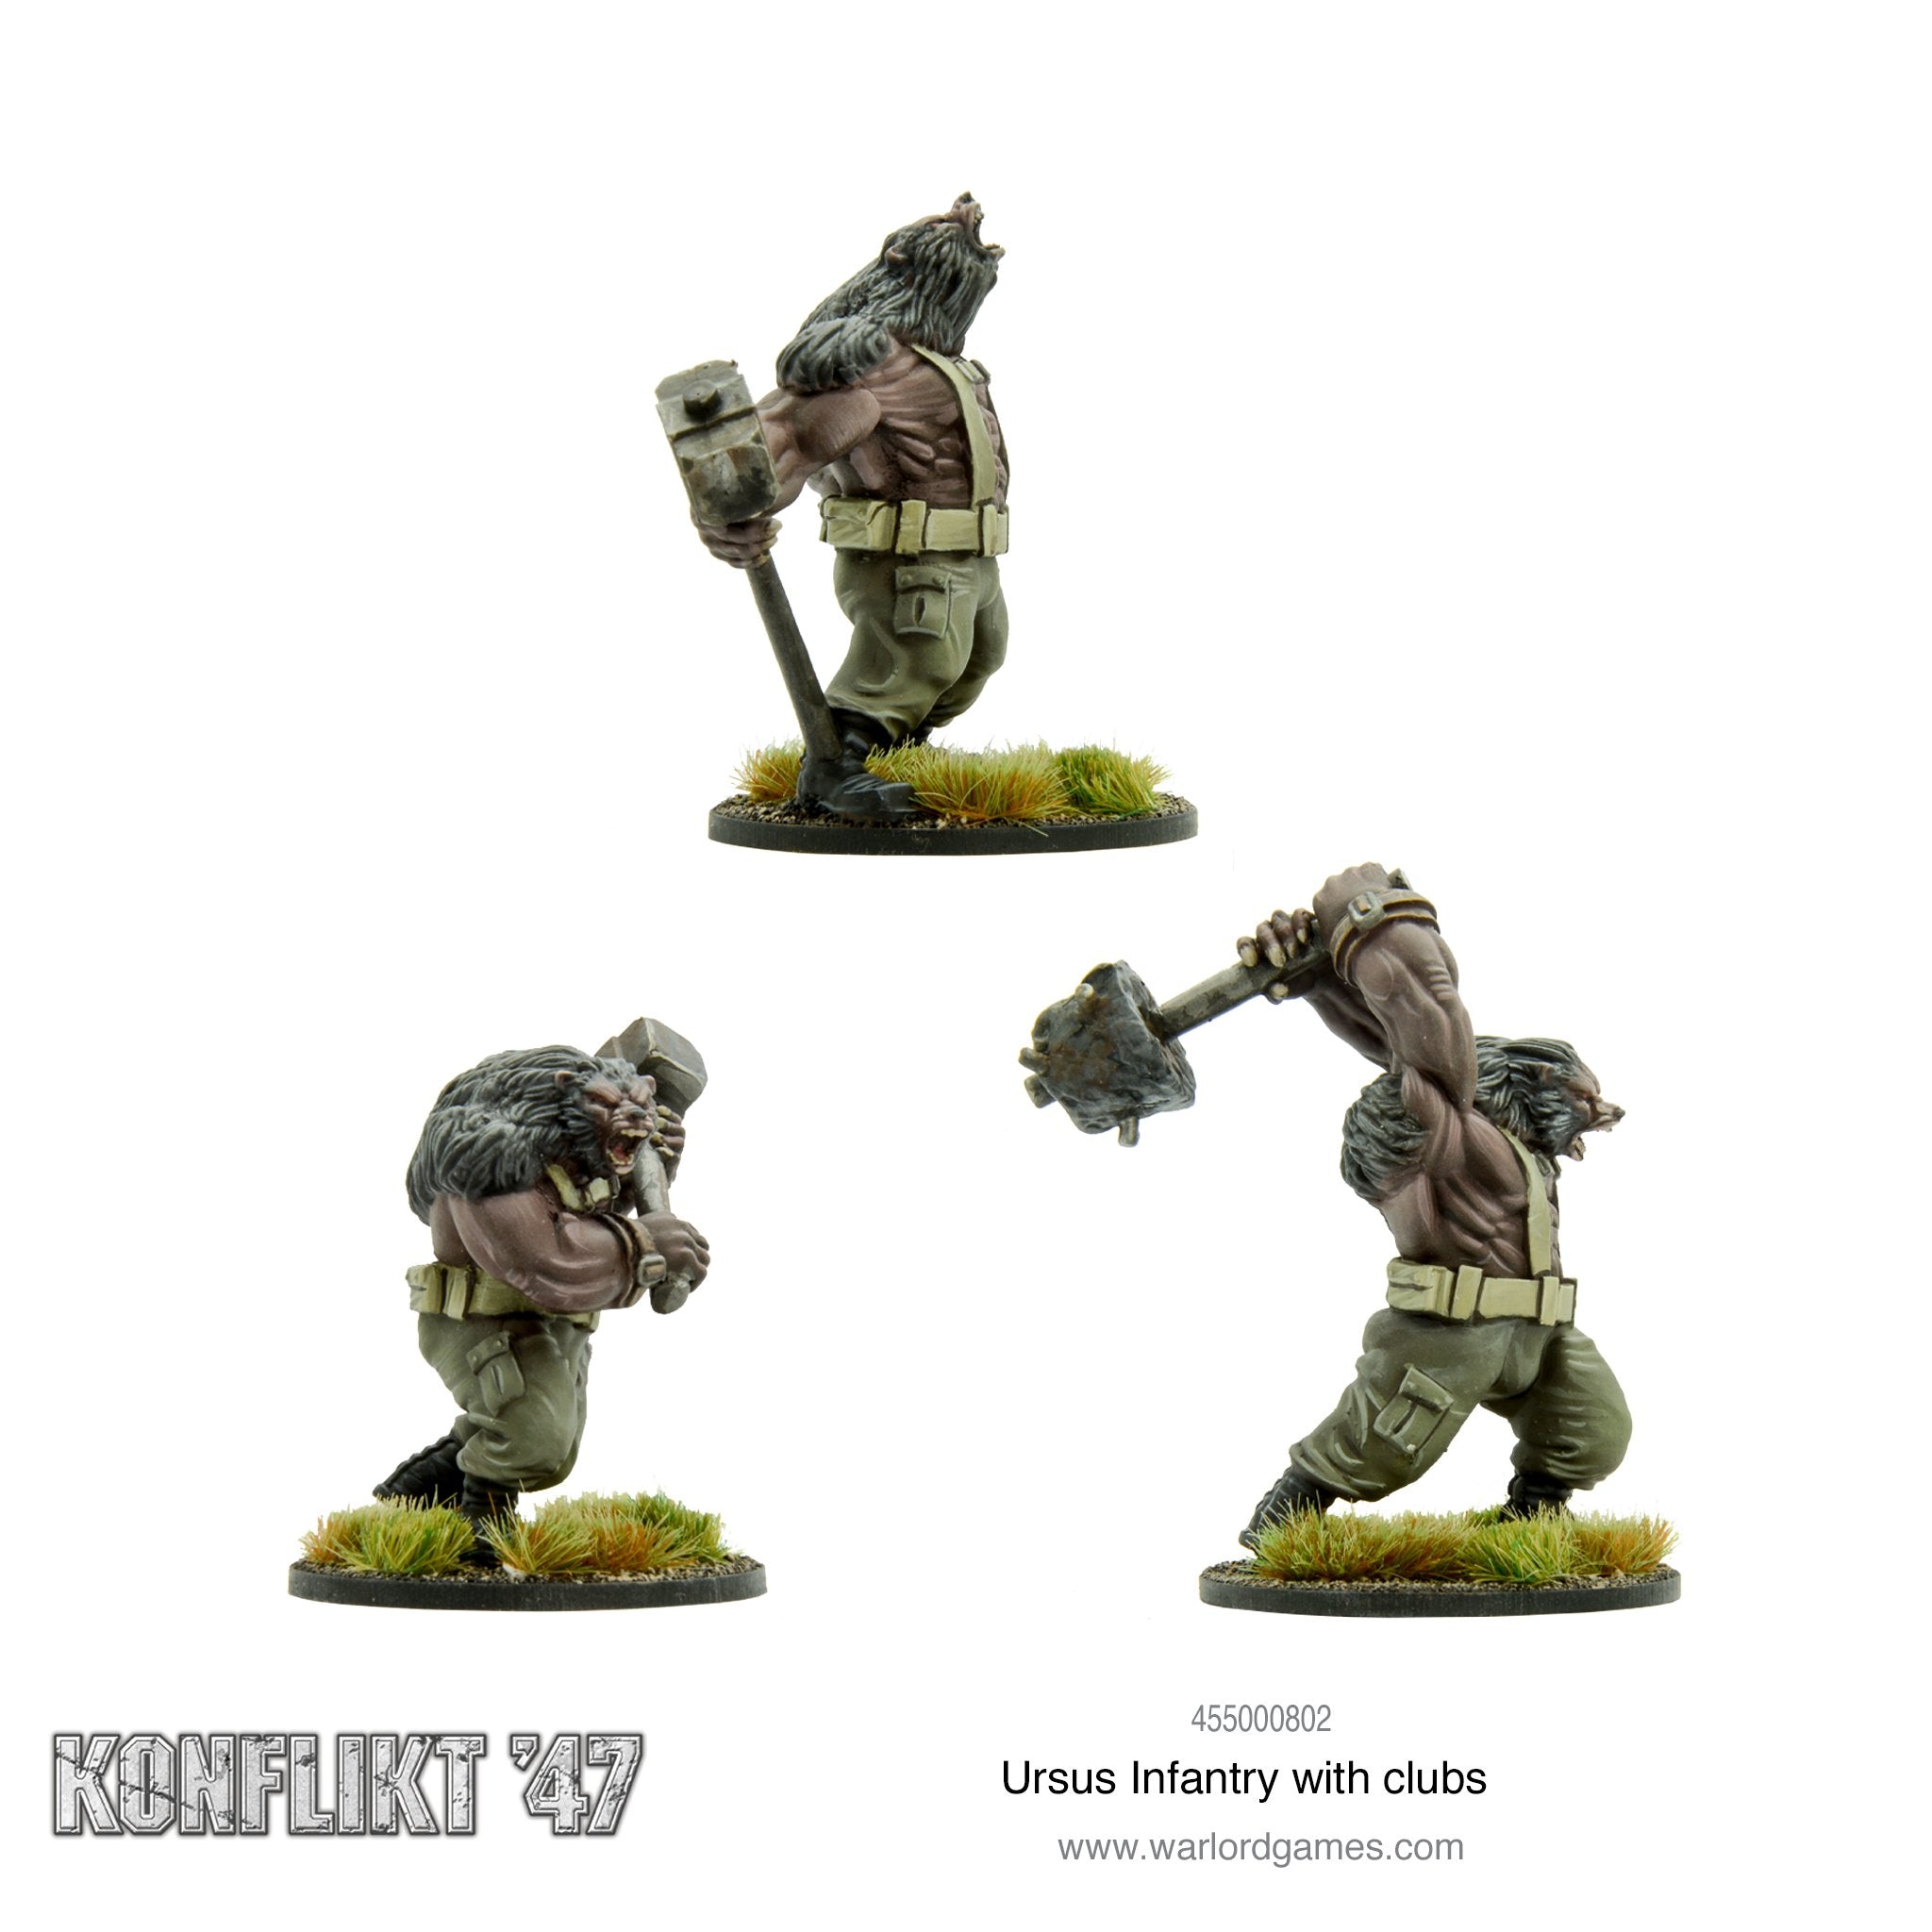 Ursus Infantry with clubs